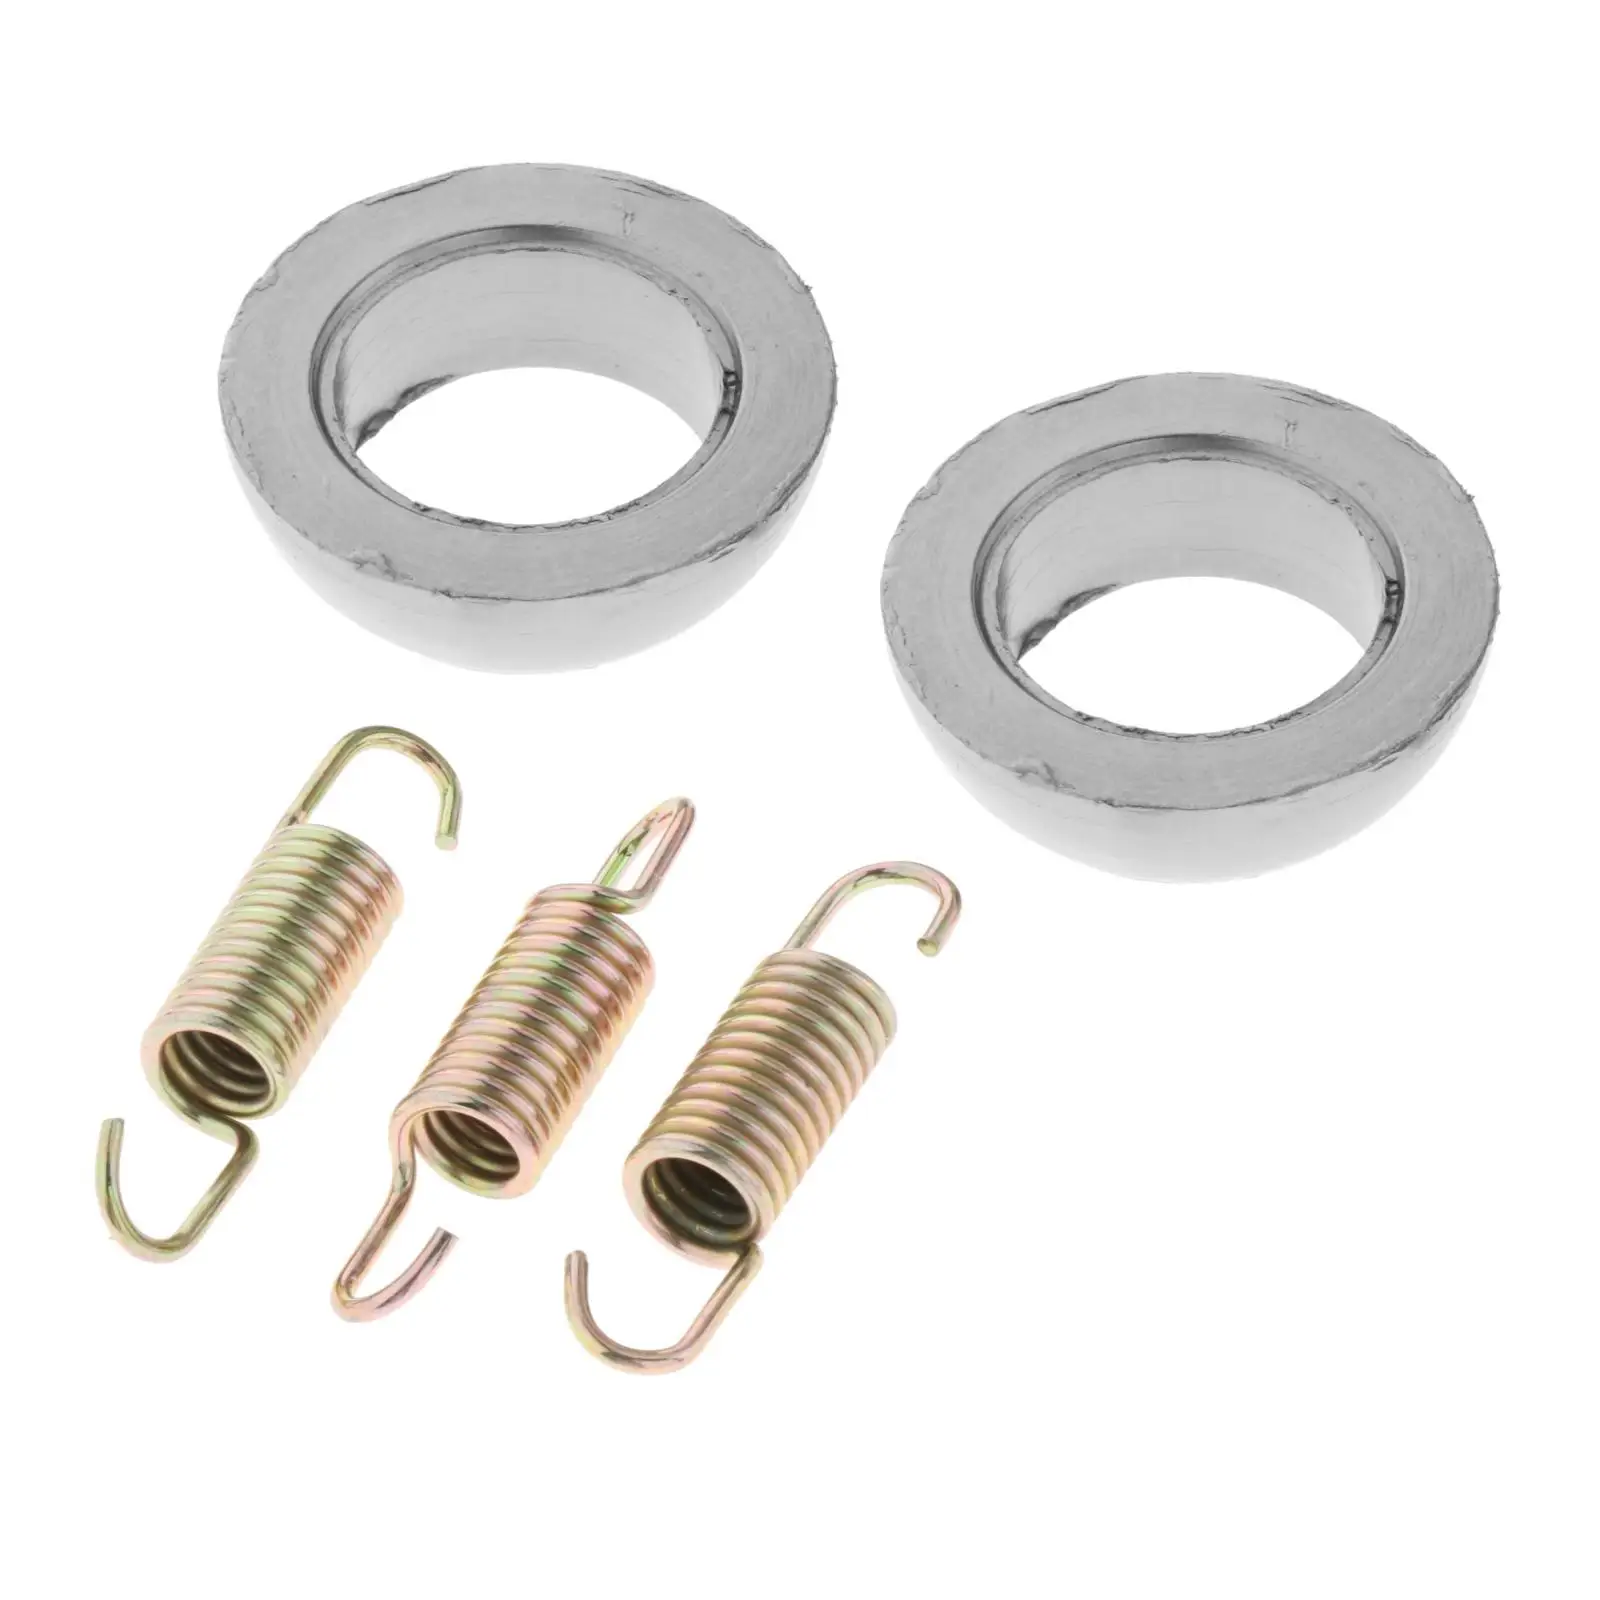 Motorbike Exhaust Gasket & Spring Kit Replacement Exhaust Pipe Springs & Gasket Kit Fit for Arctic Cat 300 1998 1999 - 2005